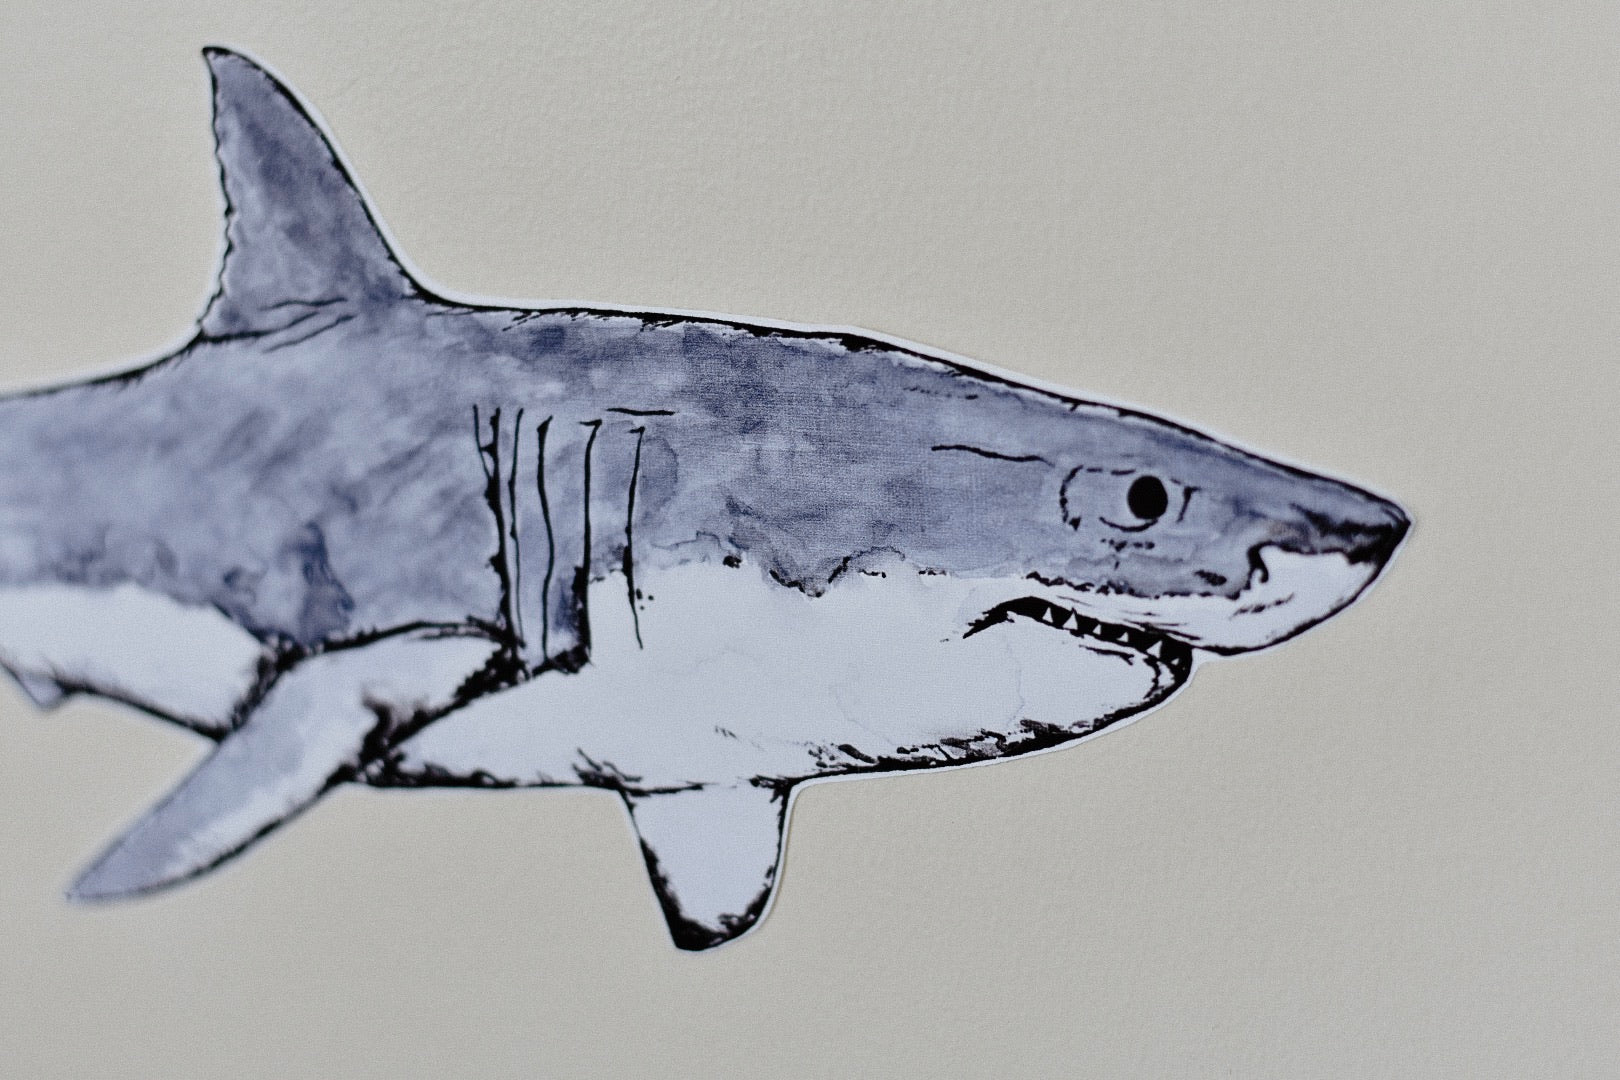 Duke the Great White Shark Fabric Wall Decal - Separate